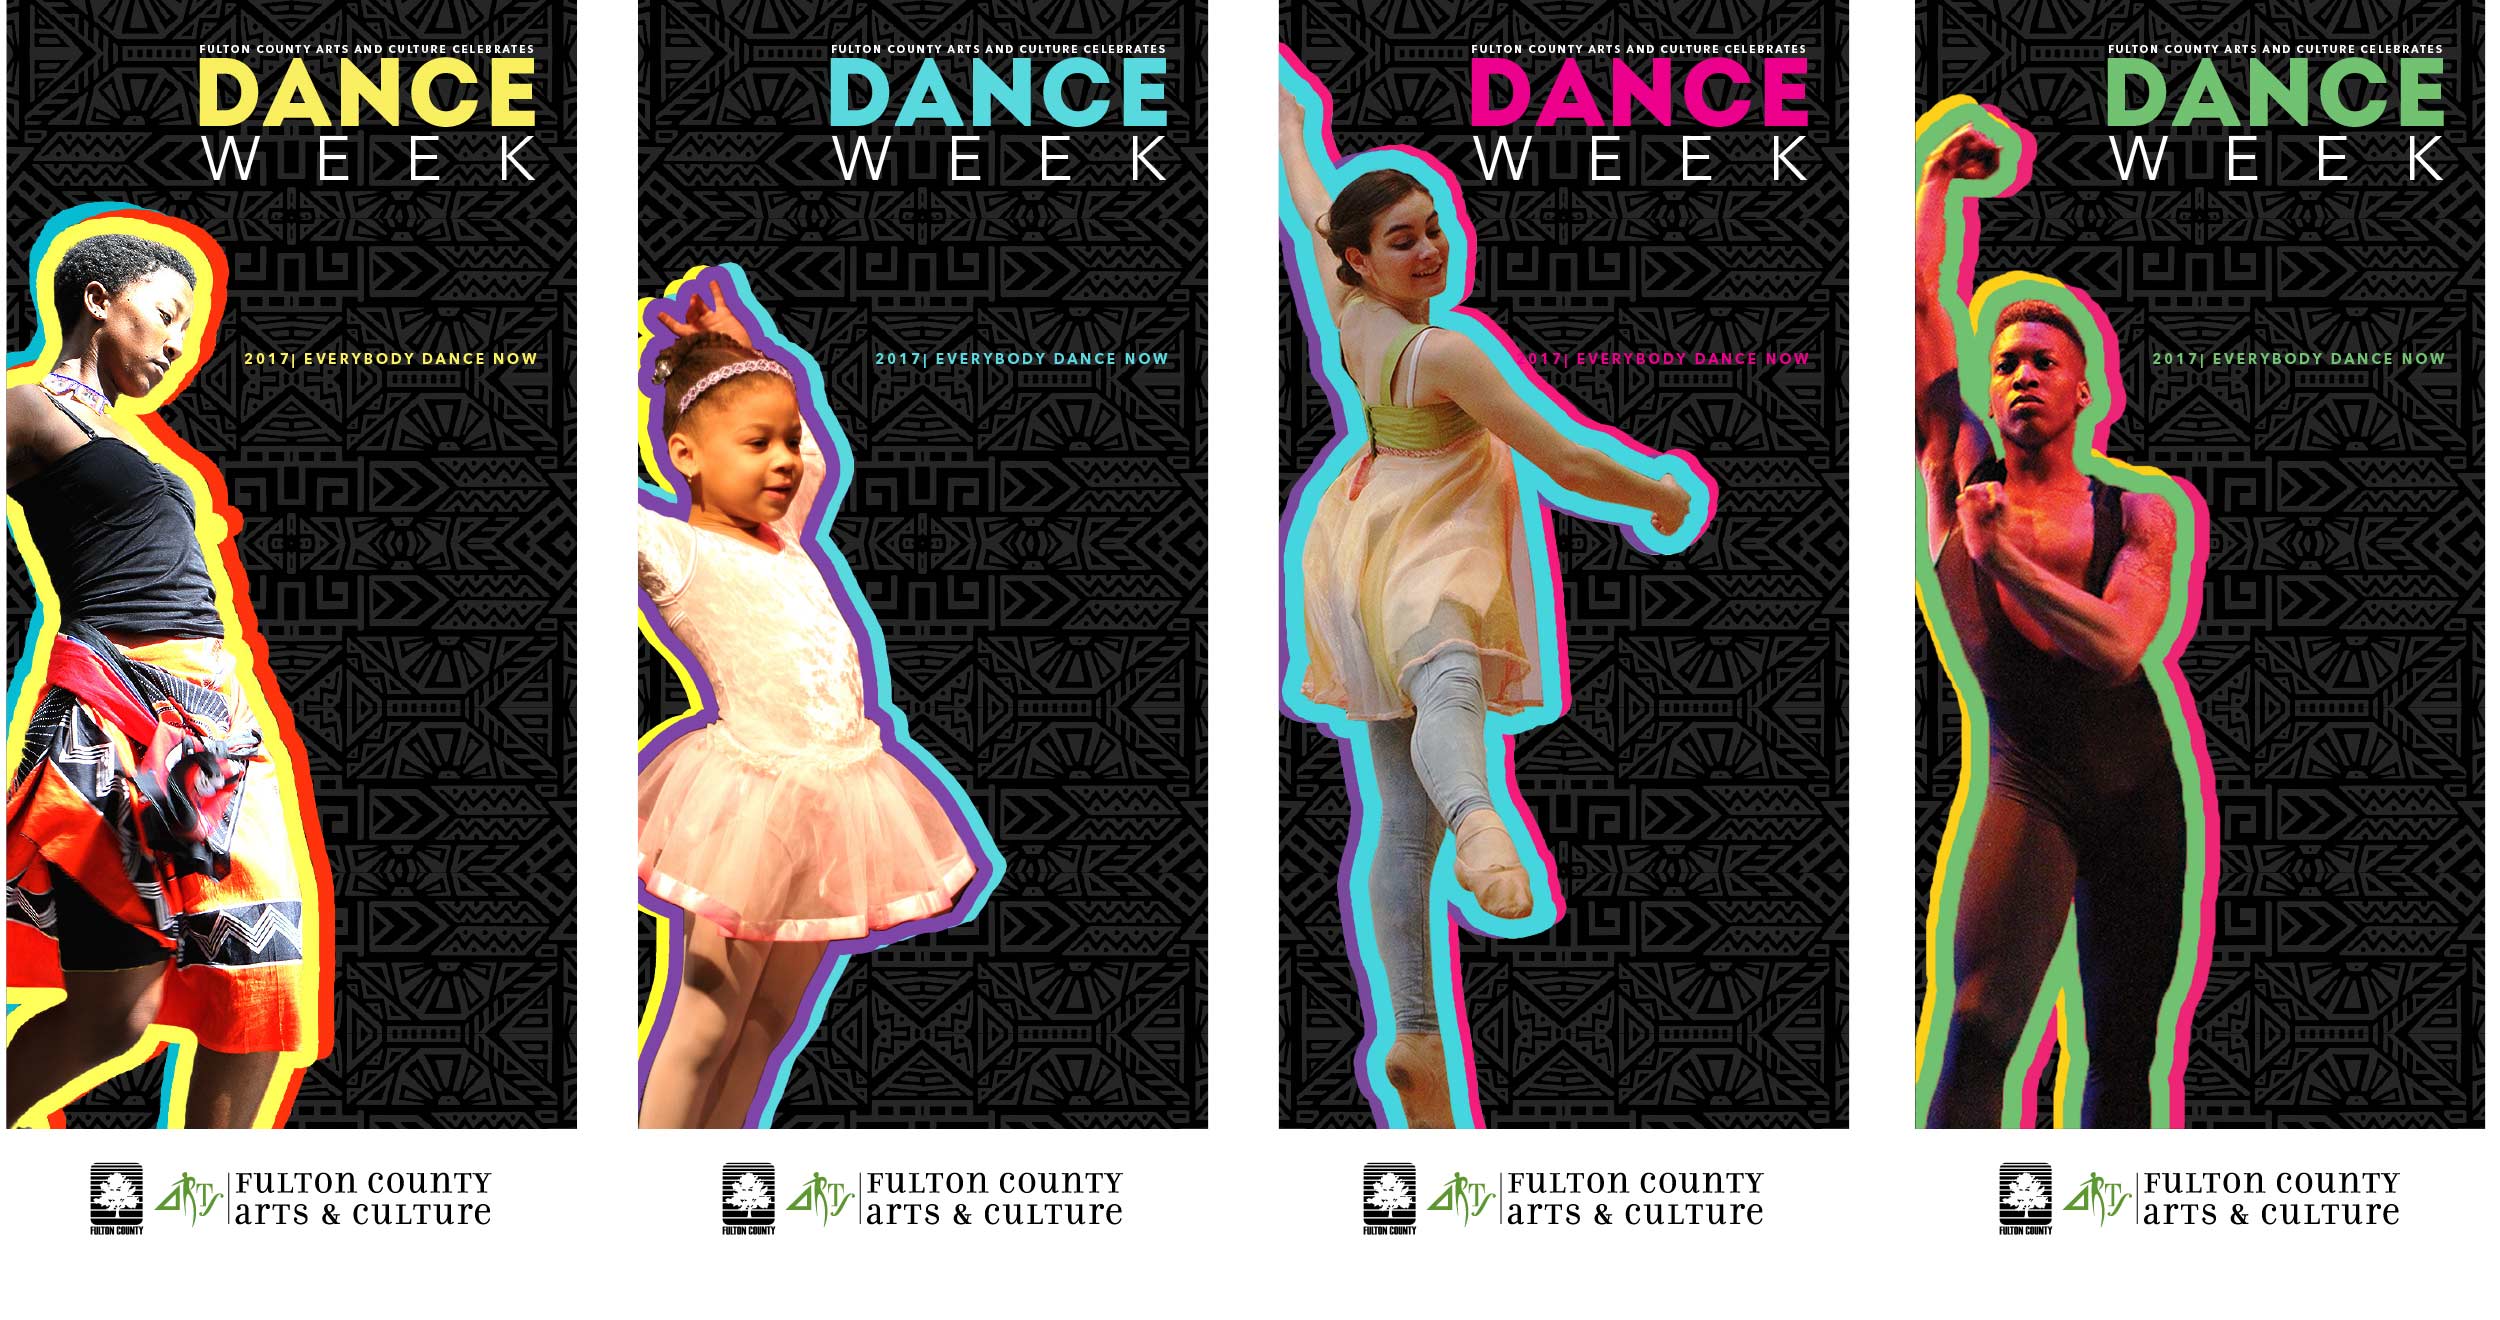 Schedule of events design for Fulton County Dance Week